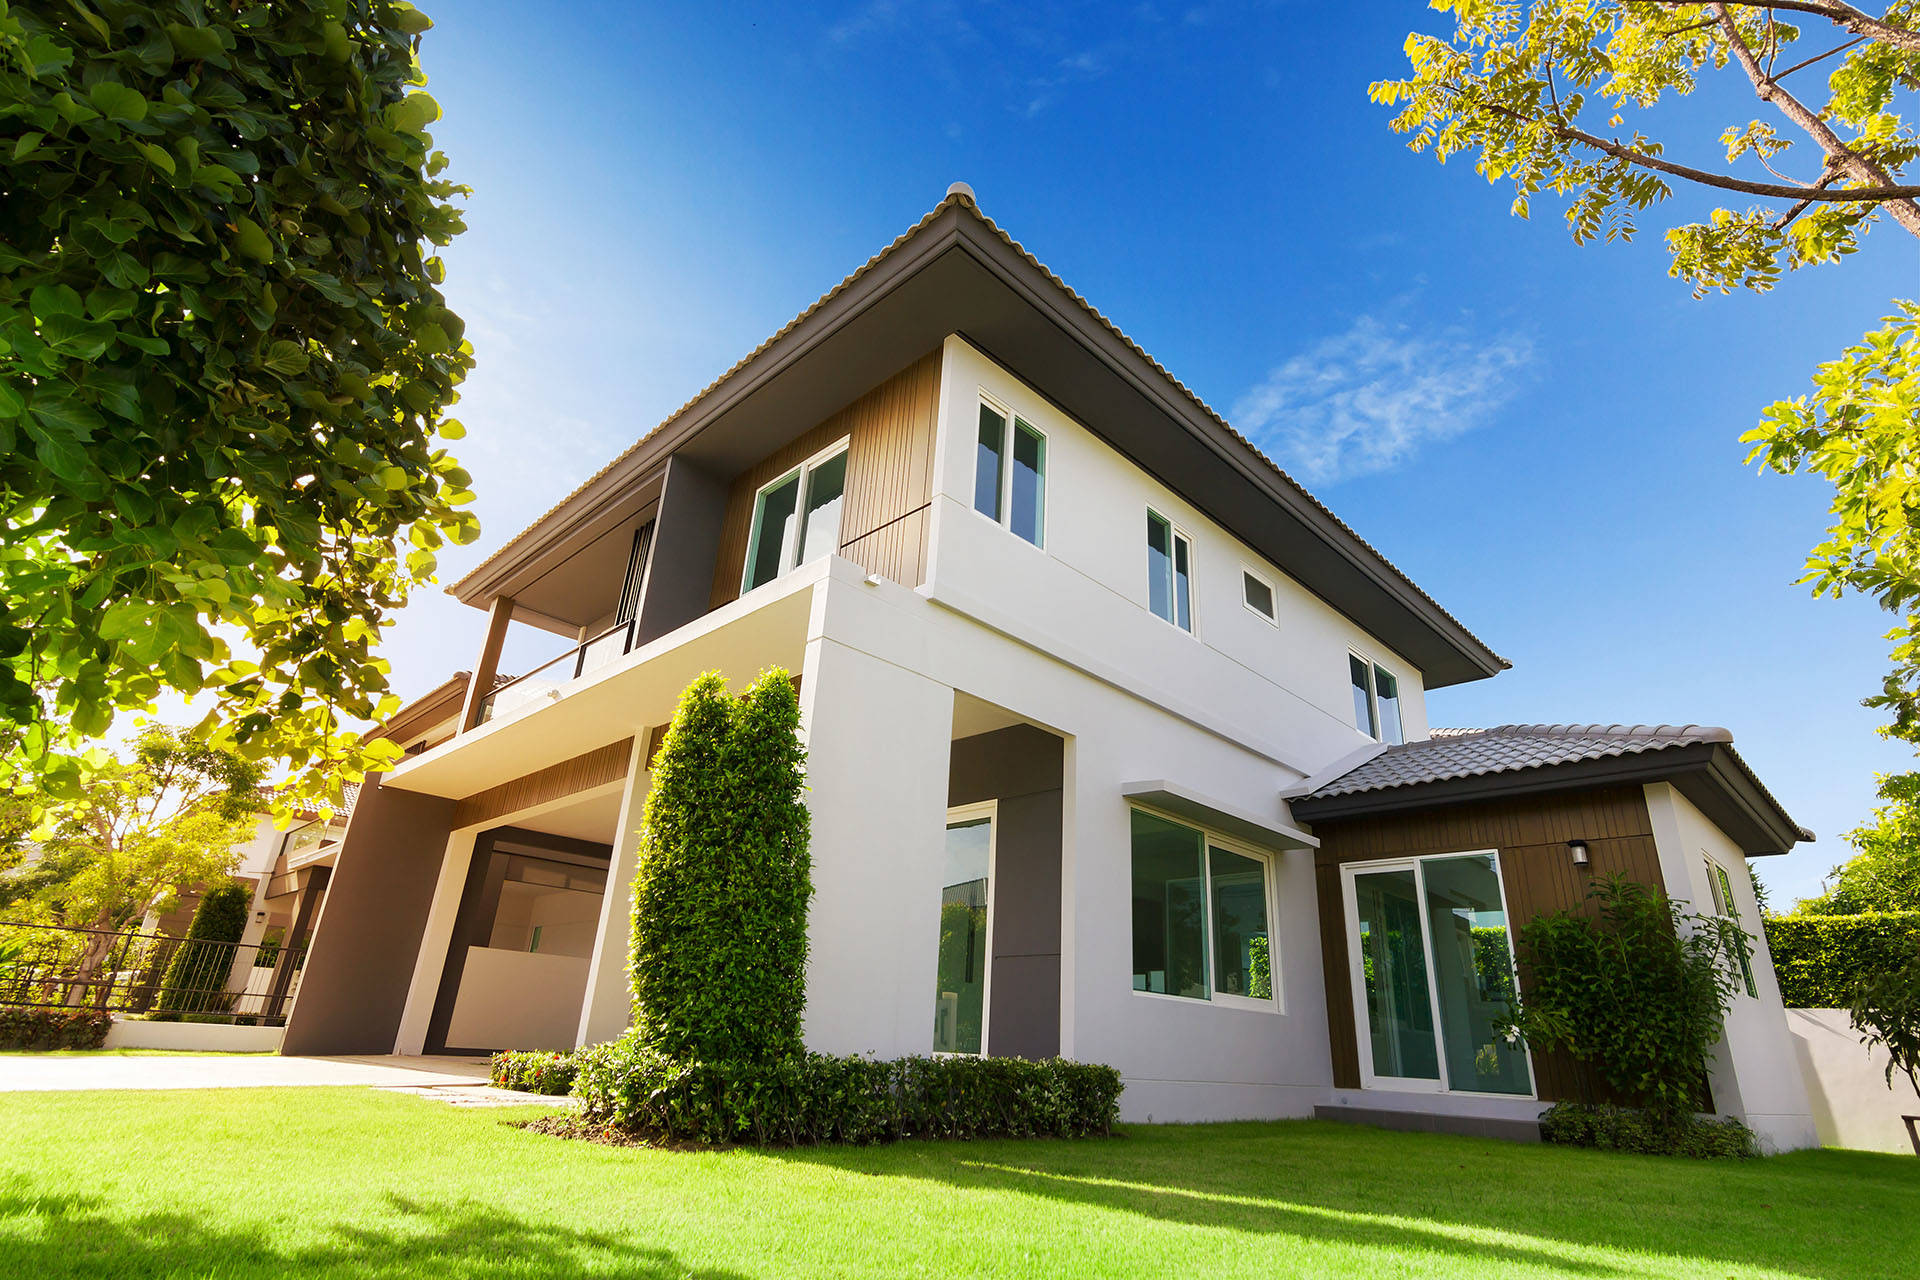 The Benefits of External Rendering: Enhancing Your Home’s Exterior Appearance